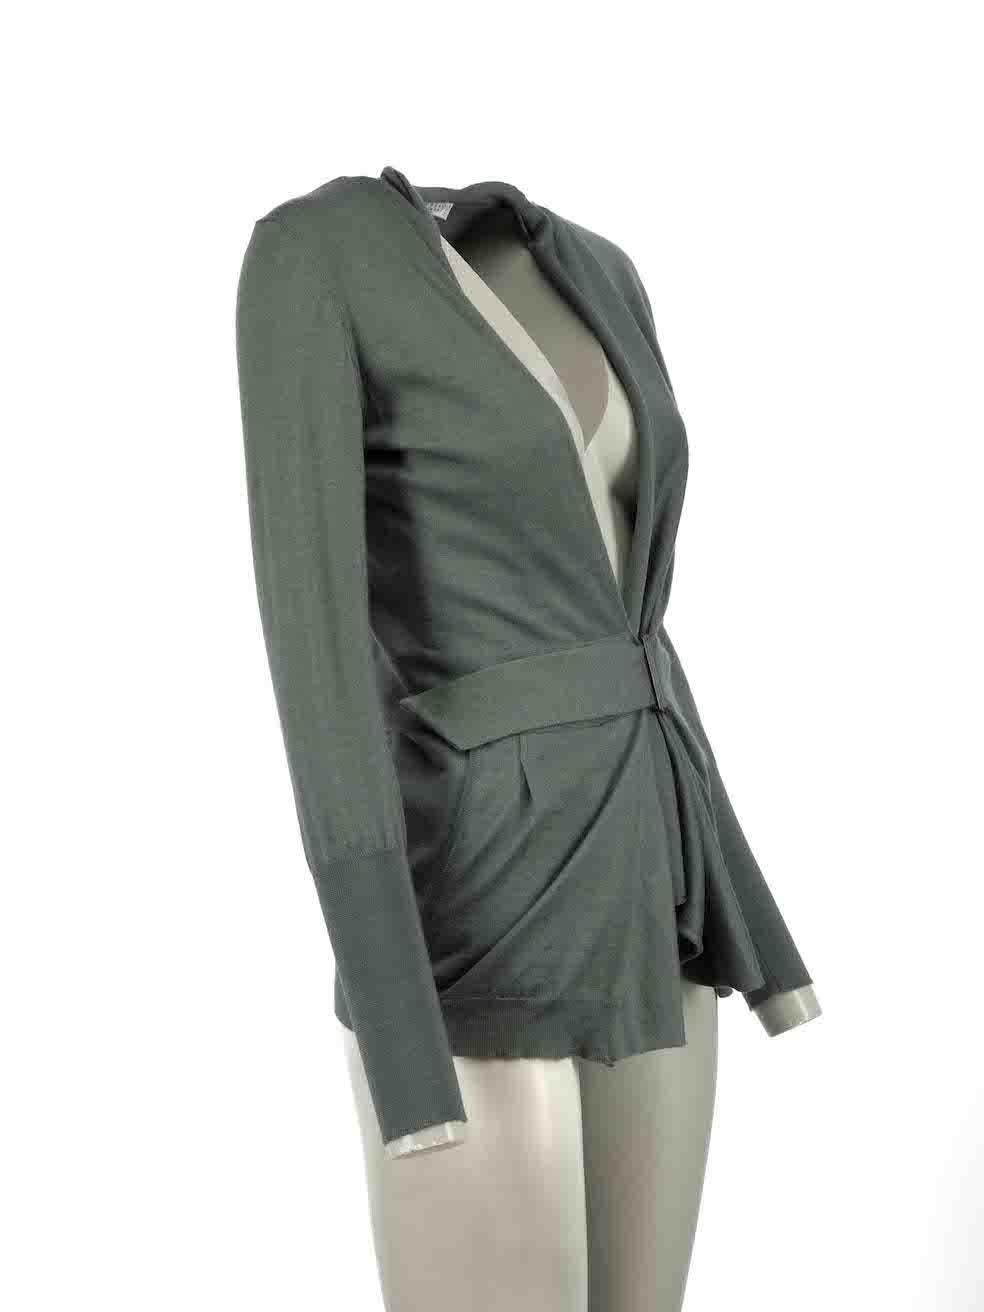 CONDITION is Very good. Minimal wear to cashmere is evident. Minimal wear to the right sleeve with a small hole to the knit on this used Brunello Cucinelli designer resale item.
 
Details
Sage green
Cashmere
Long sleeves cardigan
Fine